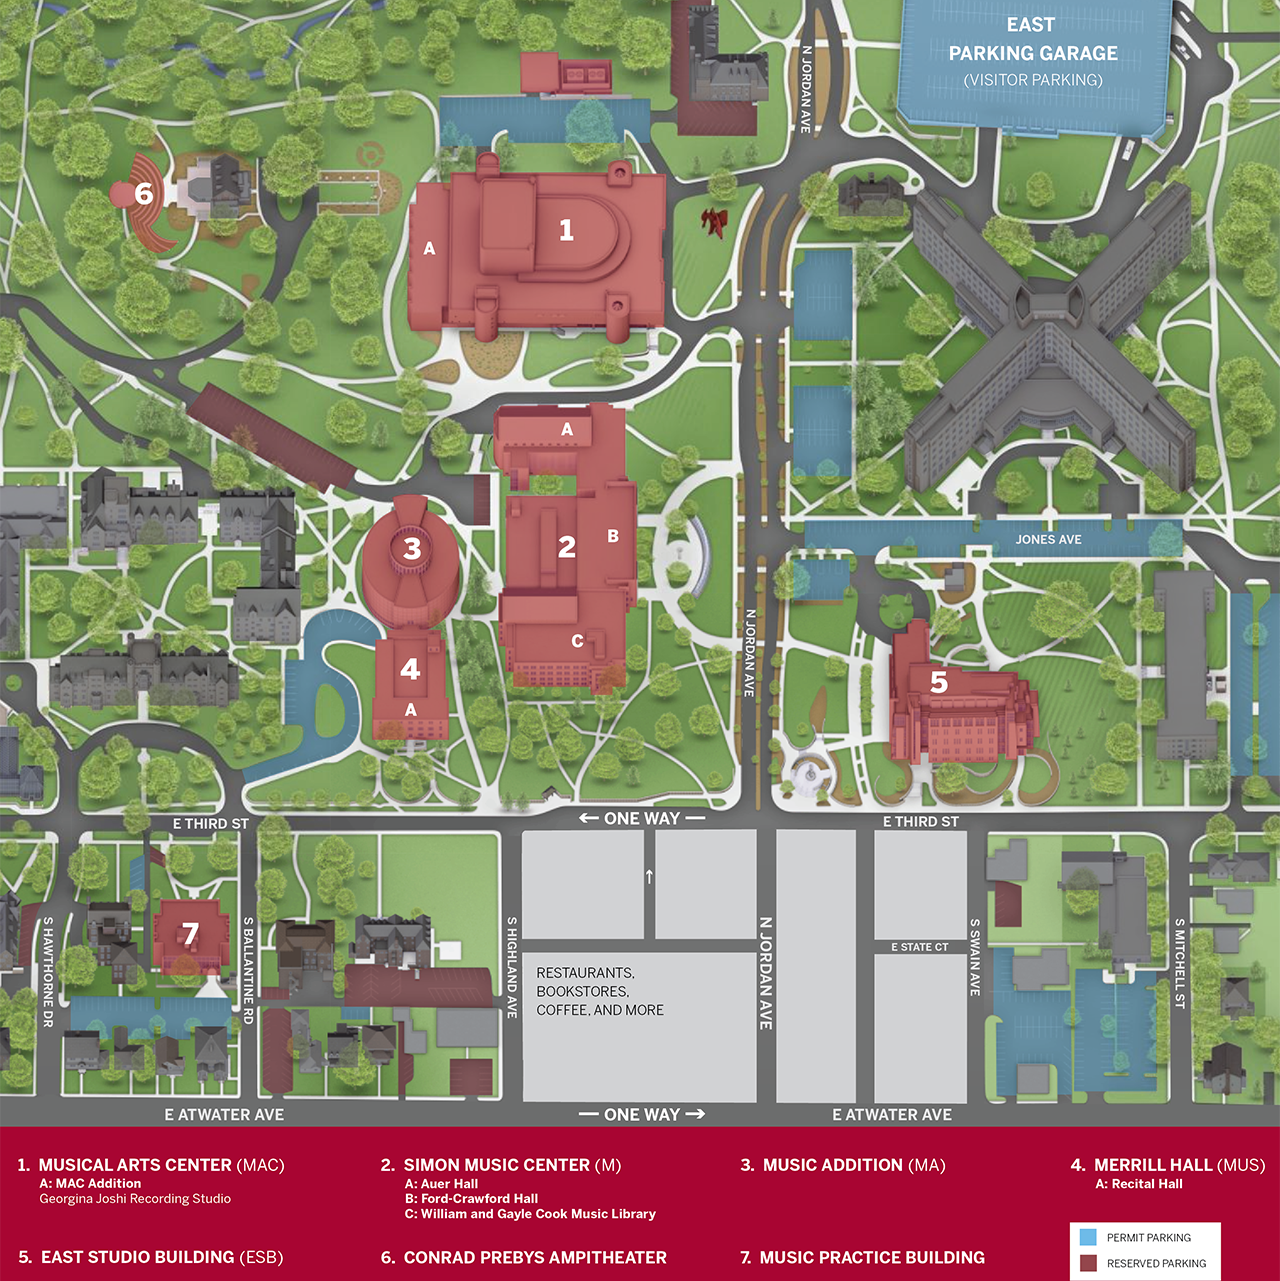 Office of Parking Operations: Indiana University Bloomington